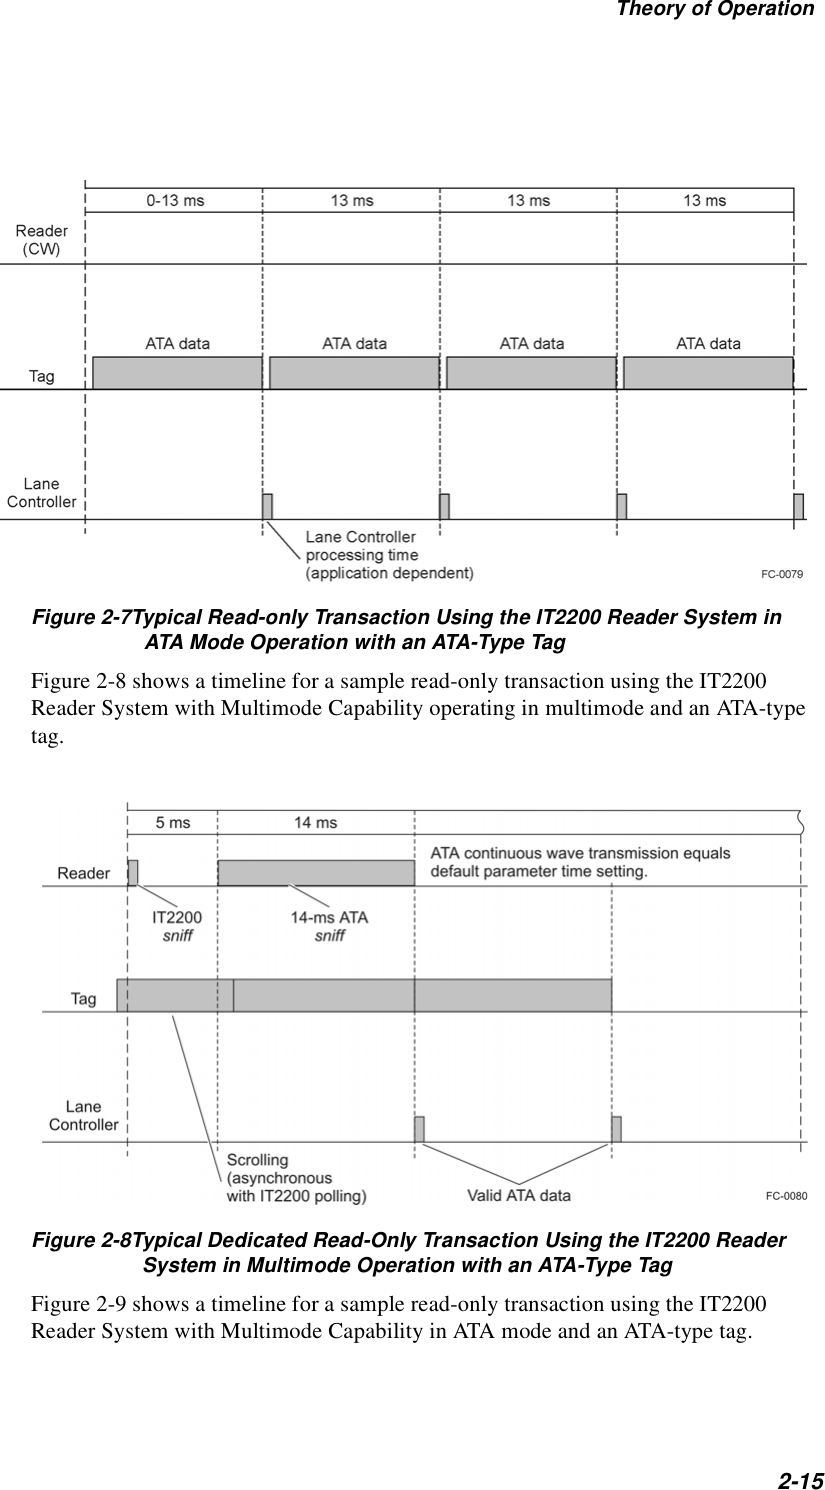 Theory of Operation2-15Figure 2-7Typical Read-only Transaction Using the IT2200 Reader System in ATA Mode Operation with an ATA-Type TagFigure 2-8 shows a timeline for a sample read-only transaction using the IT2200 Reader System with Multimode Capability operating in multimode and an ATA-type tag.Figure 2-8Typical Dedicated Read-Only Transaction Using the IT2200 Reader System in Multimode Operation with an ATA-Type TagFigure 2-9 shows a timeline for a sample read-only transaction using the IT2200 Reader System with Multimode Capability in ATA mode and an ATA-type tag.